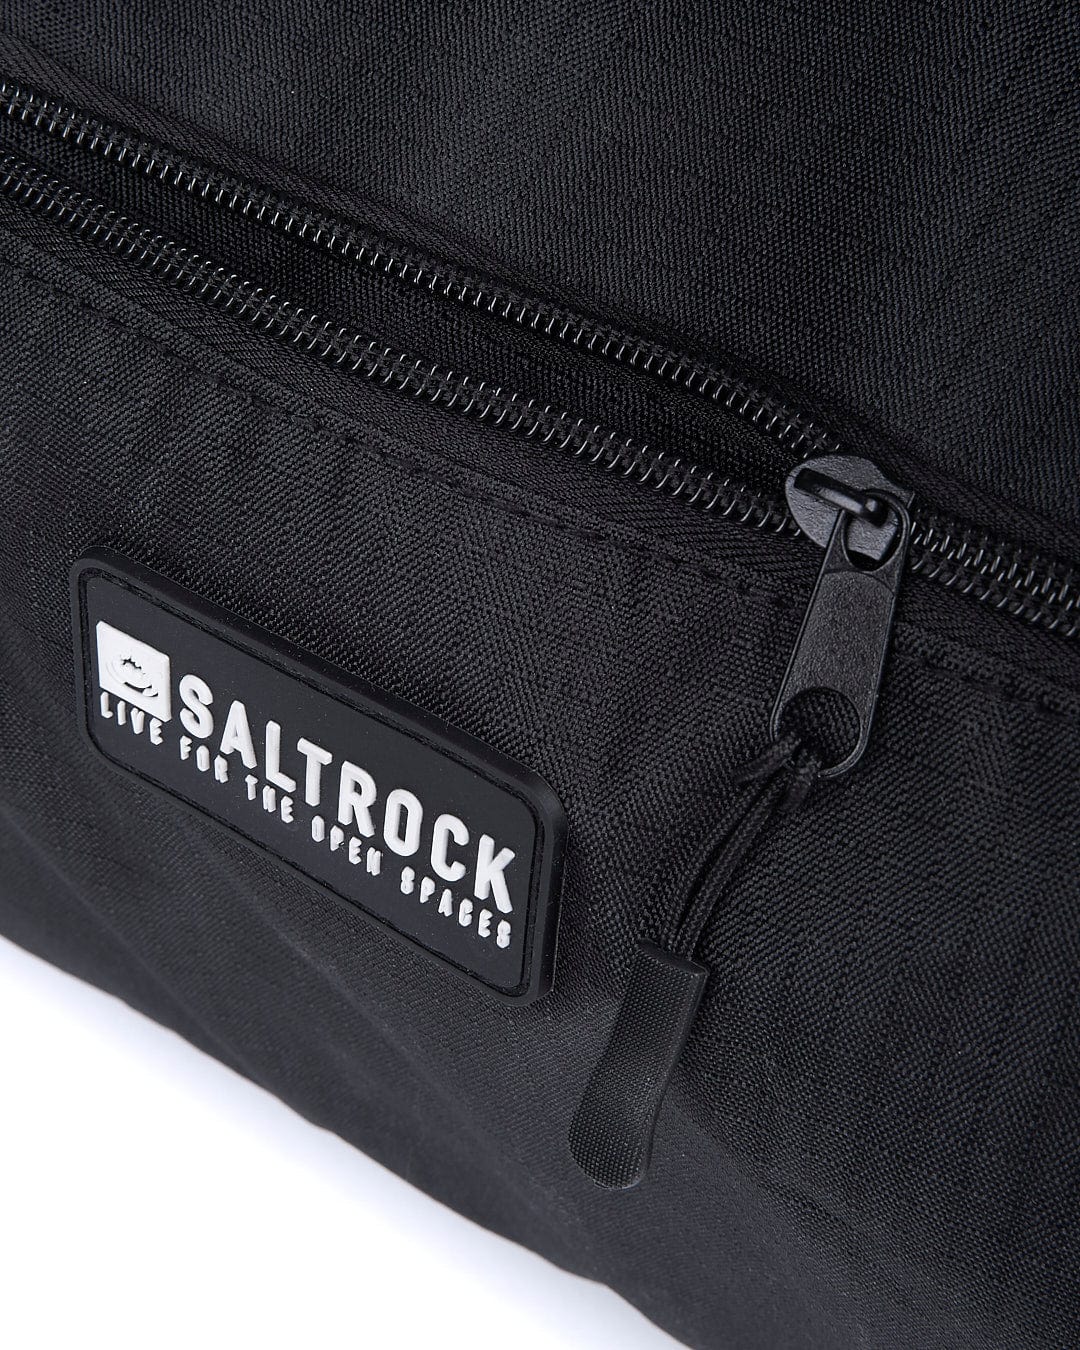 A black Balboa - Holdall - Black bag with the word Saltrock on it.